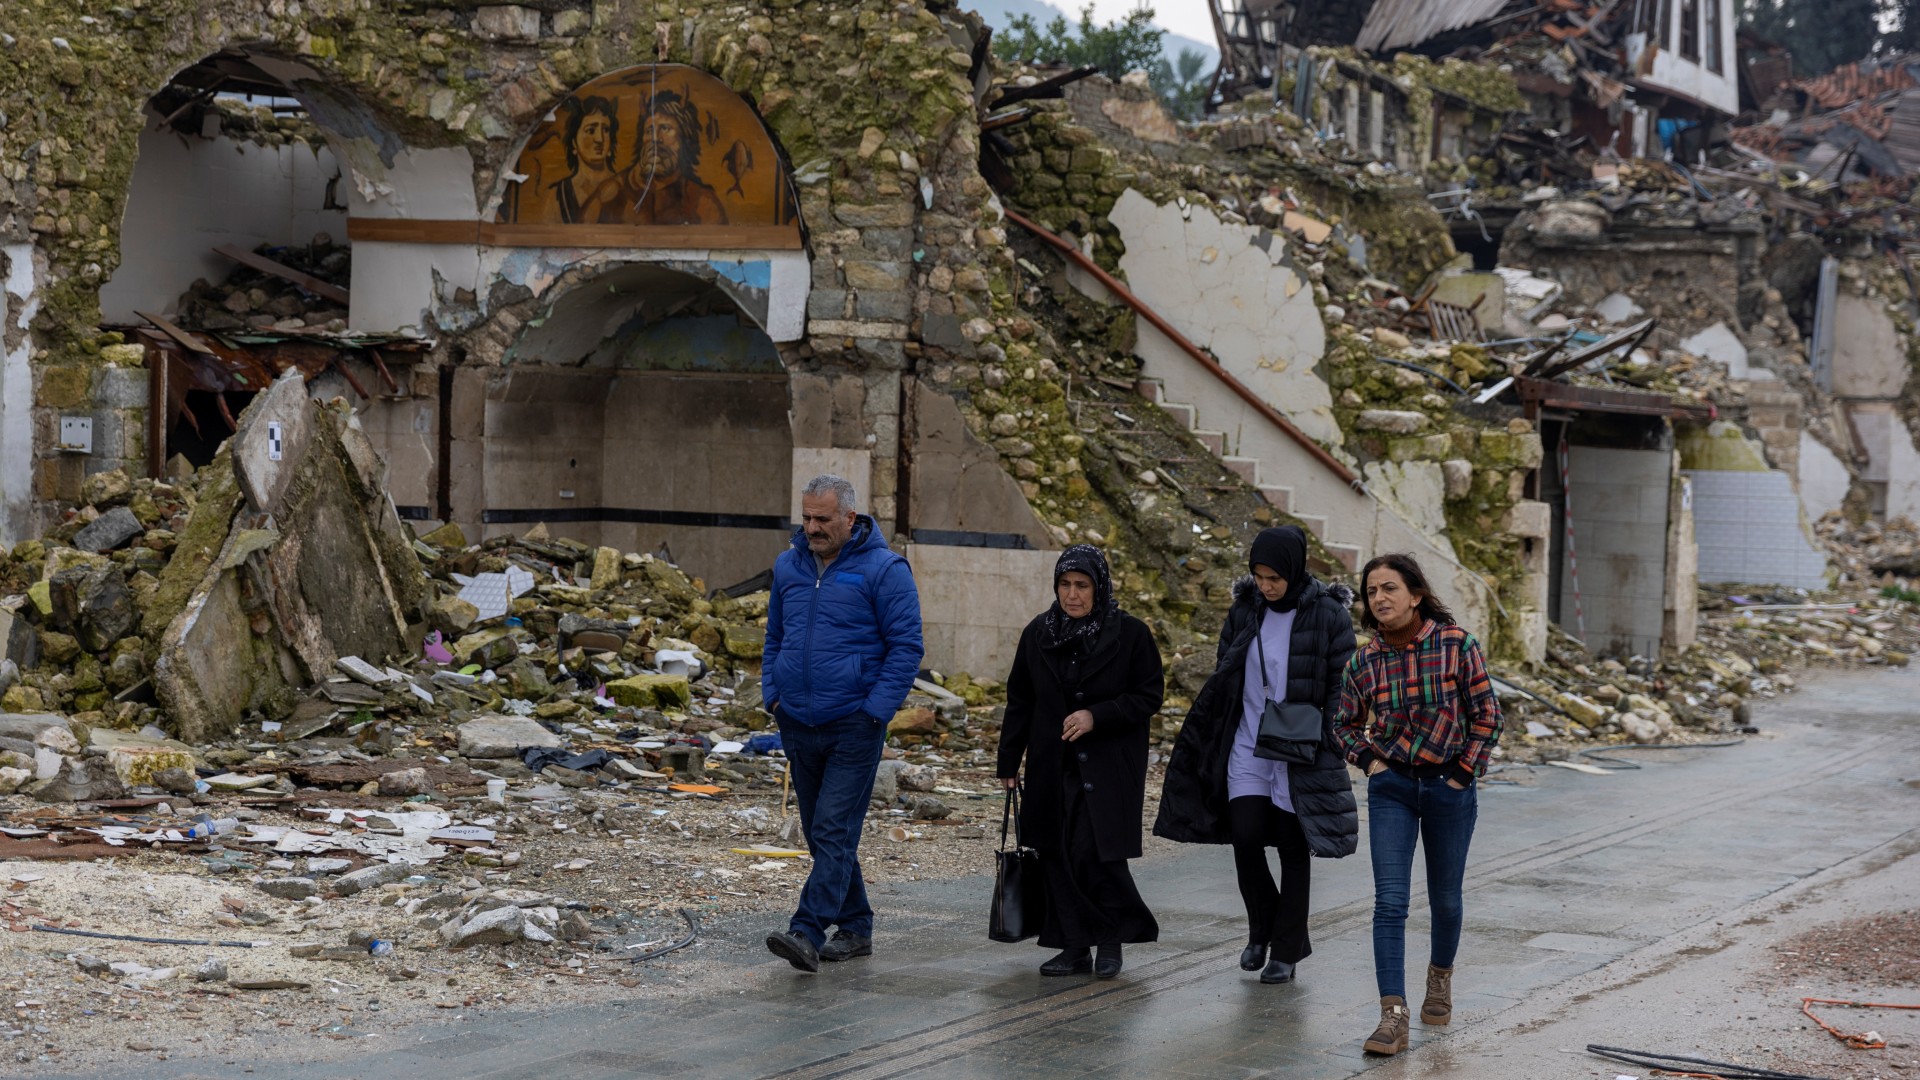 People walk past houses destroyed by last year's earthquake, in Hatay, 5 February (Reuters/Umit Bektas)